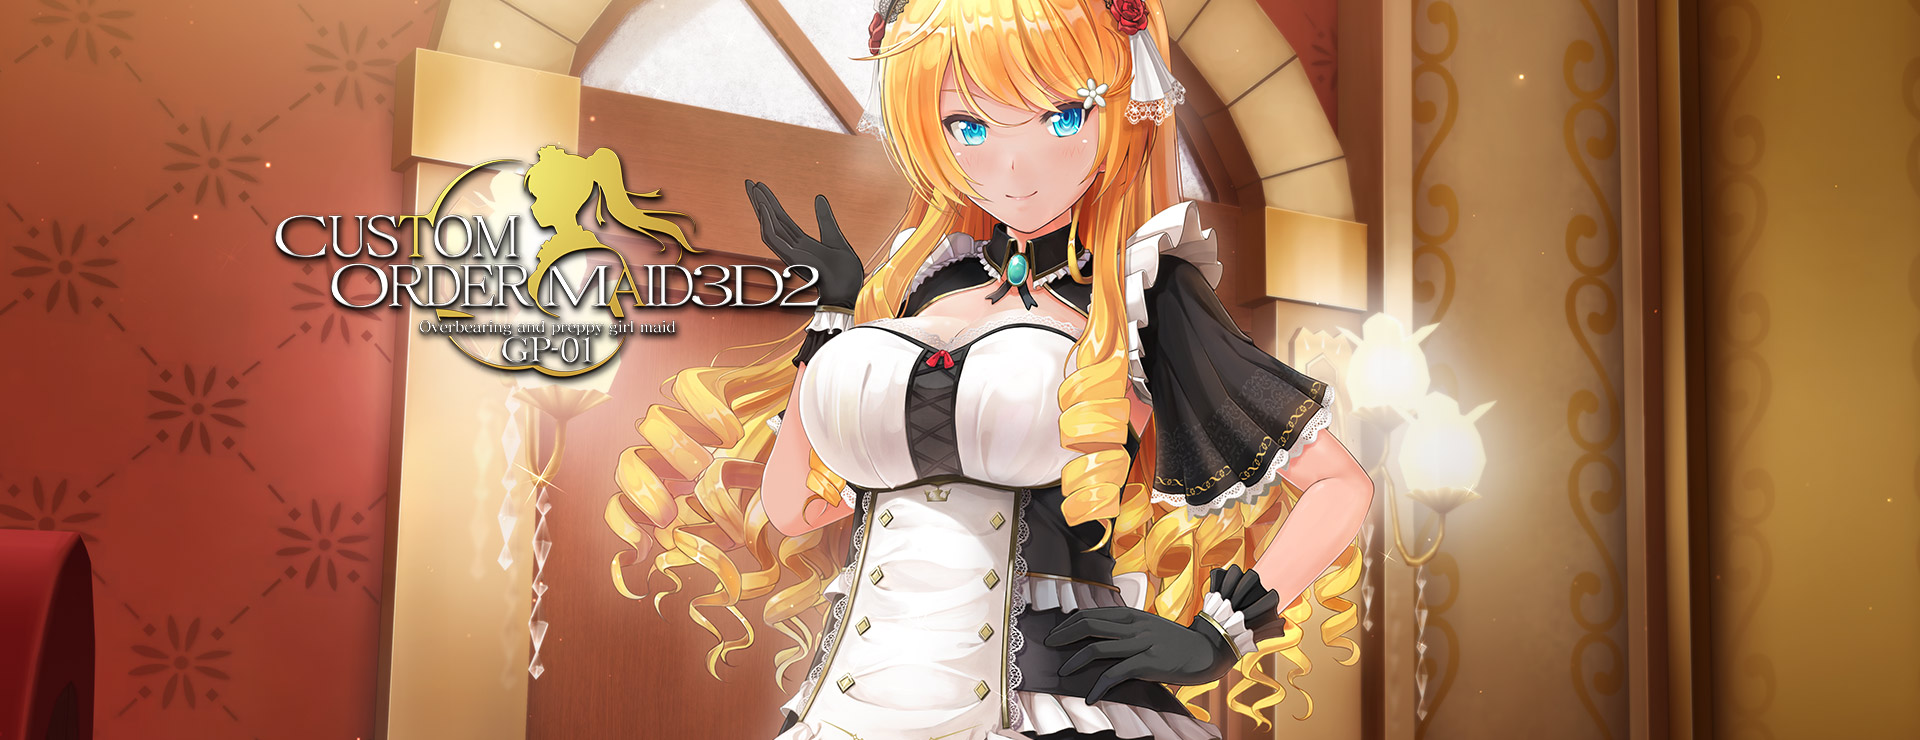 Custom Order Maid 3D2: Overbearing and Preppy Girl Maid GP-01 - Simulation Game